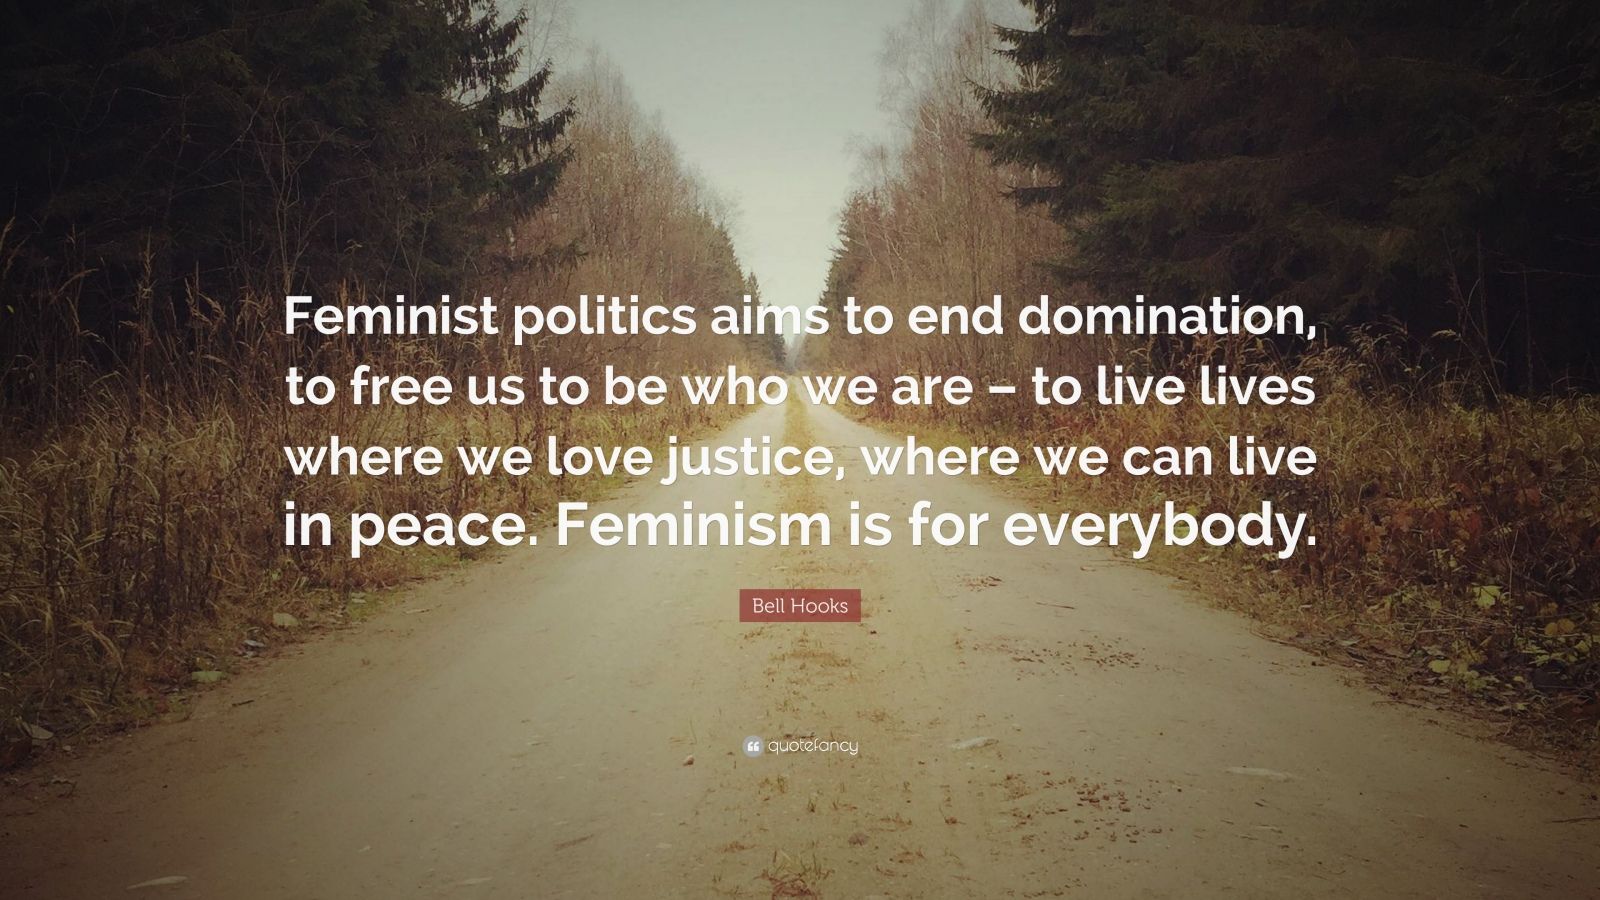 Feminism Is for Everybody by bell hooks